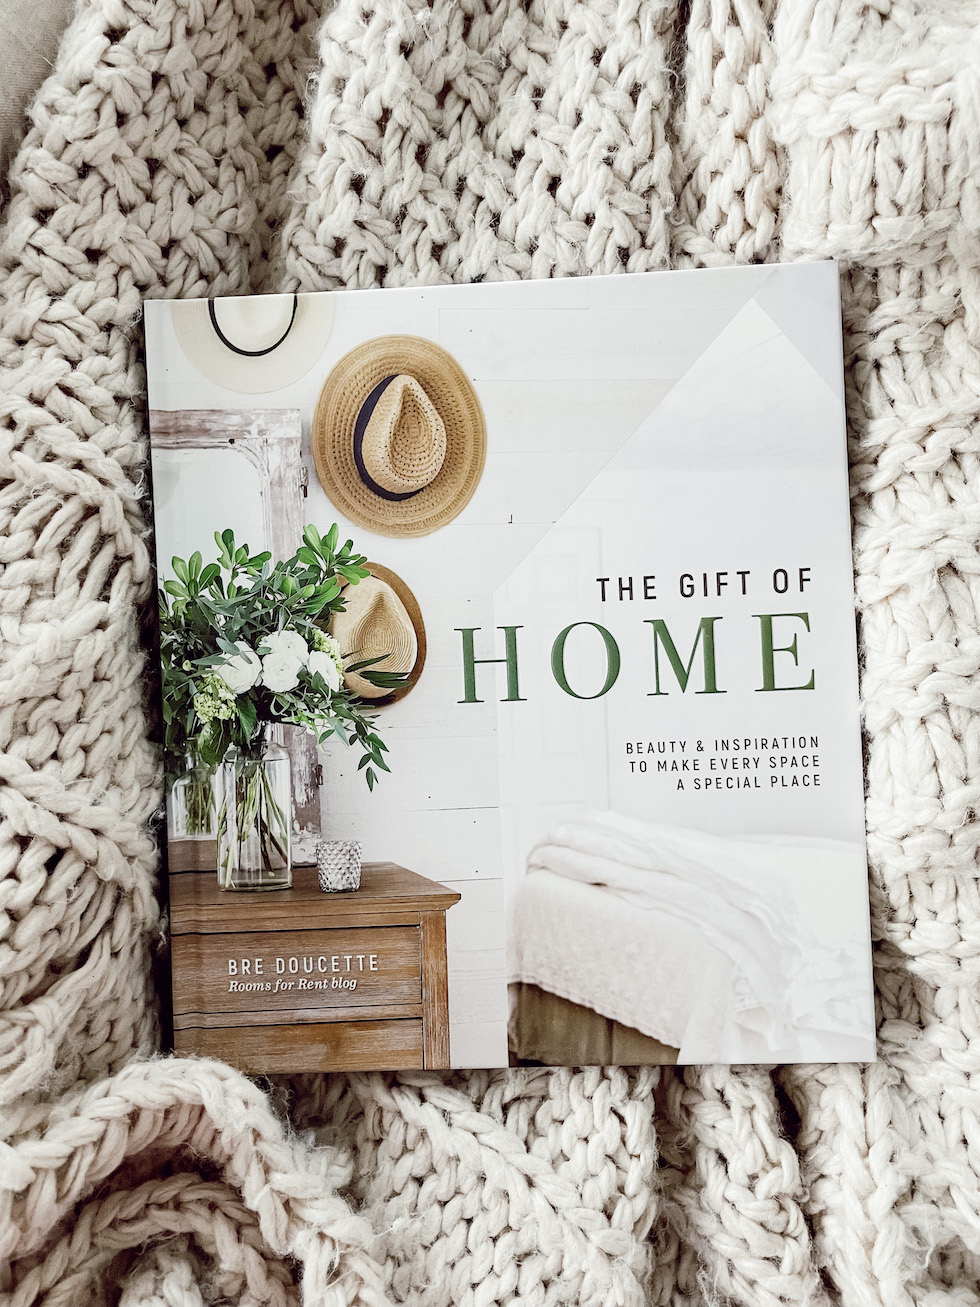 My Design Philosophy + The Gift of Home